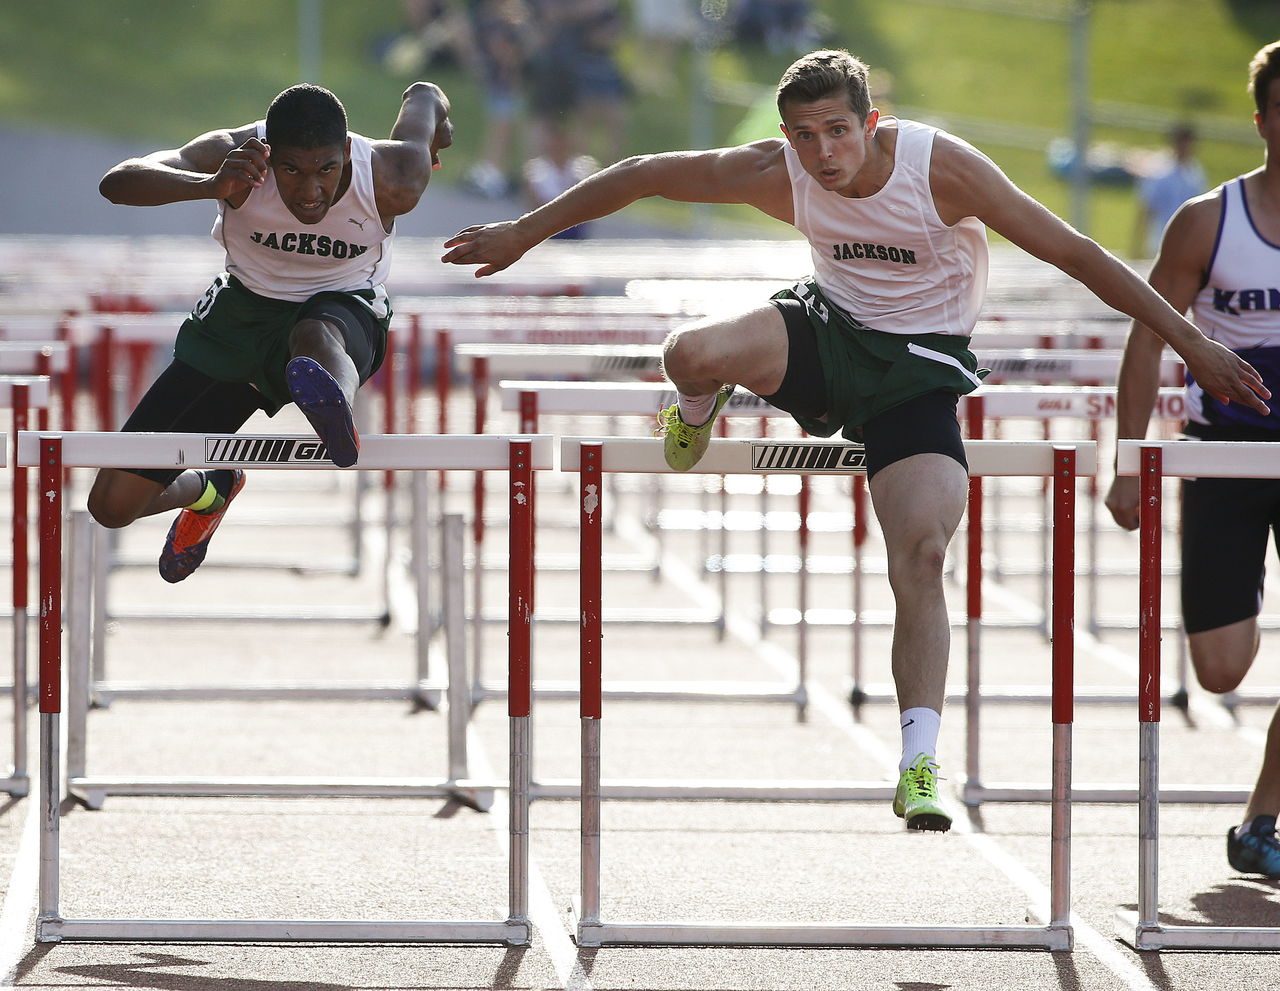 Jackson’s Dylan Roy (right) edges out teammate Silas Vega-Harris (left) for the win in the boys 110-meter hurdles at the Wesco 4A league championships on Friday at Snohomish High School.